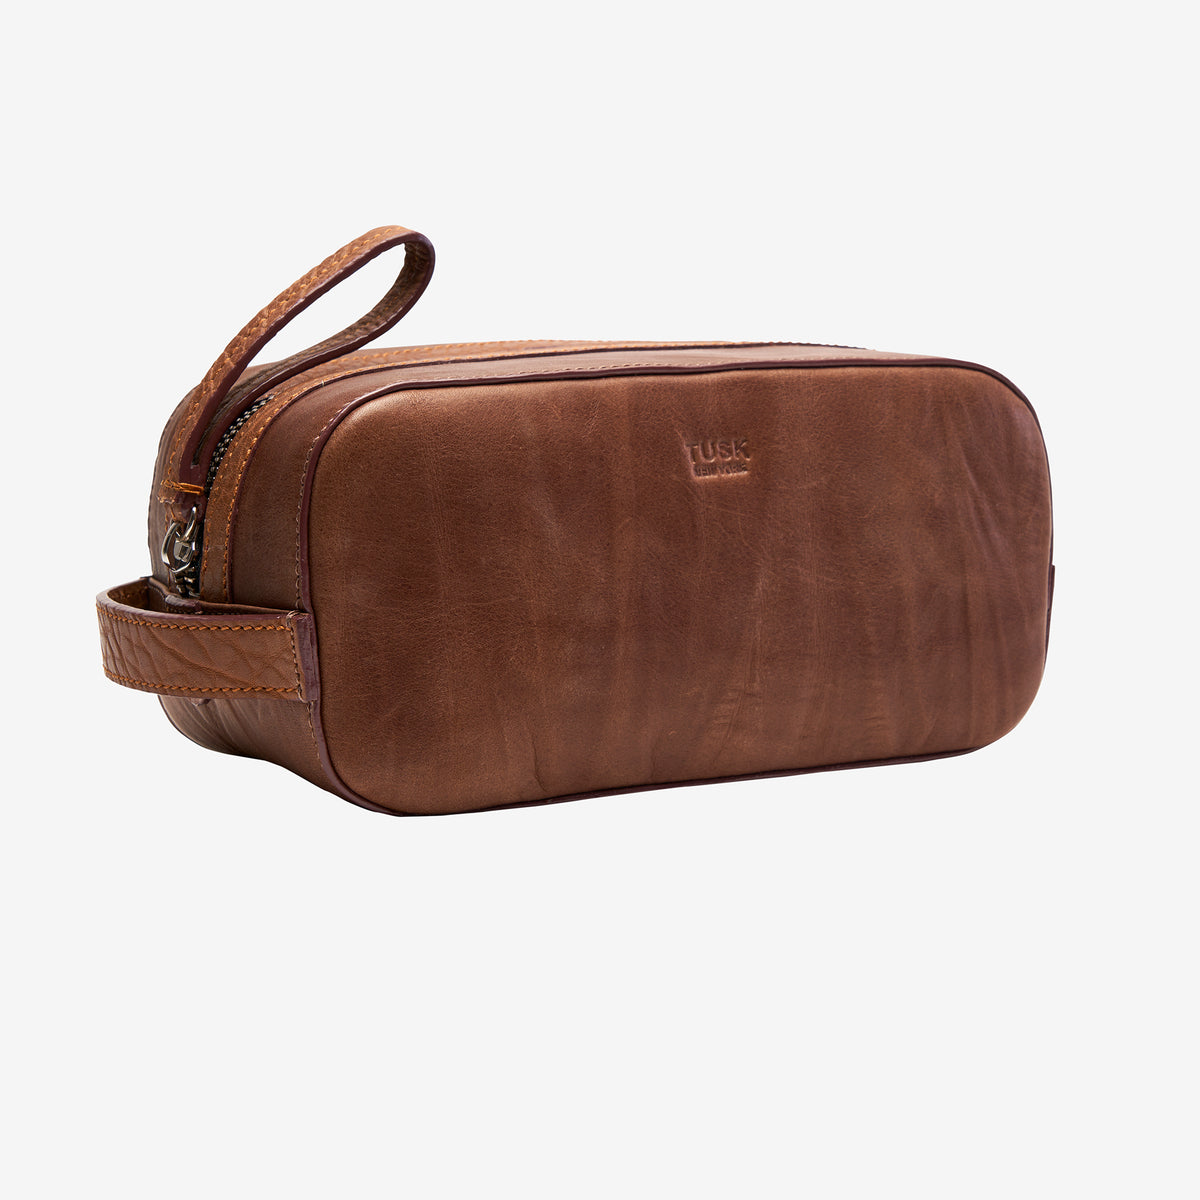 tusk-770-mens-leather-toiletry-case-chocolate-side